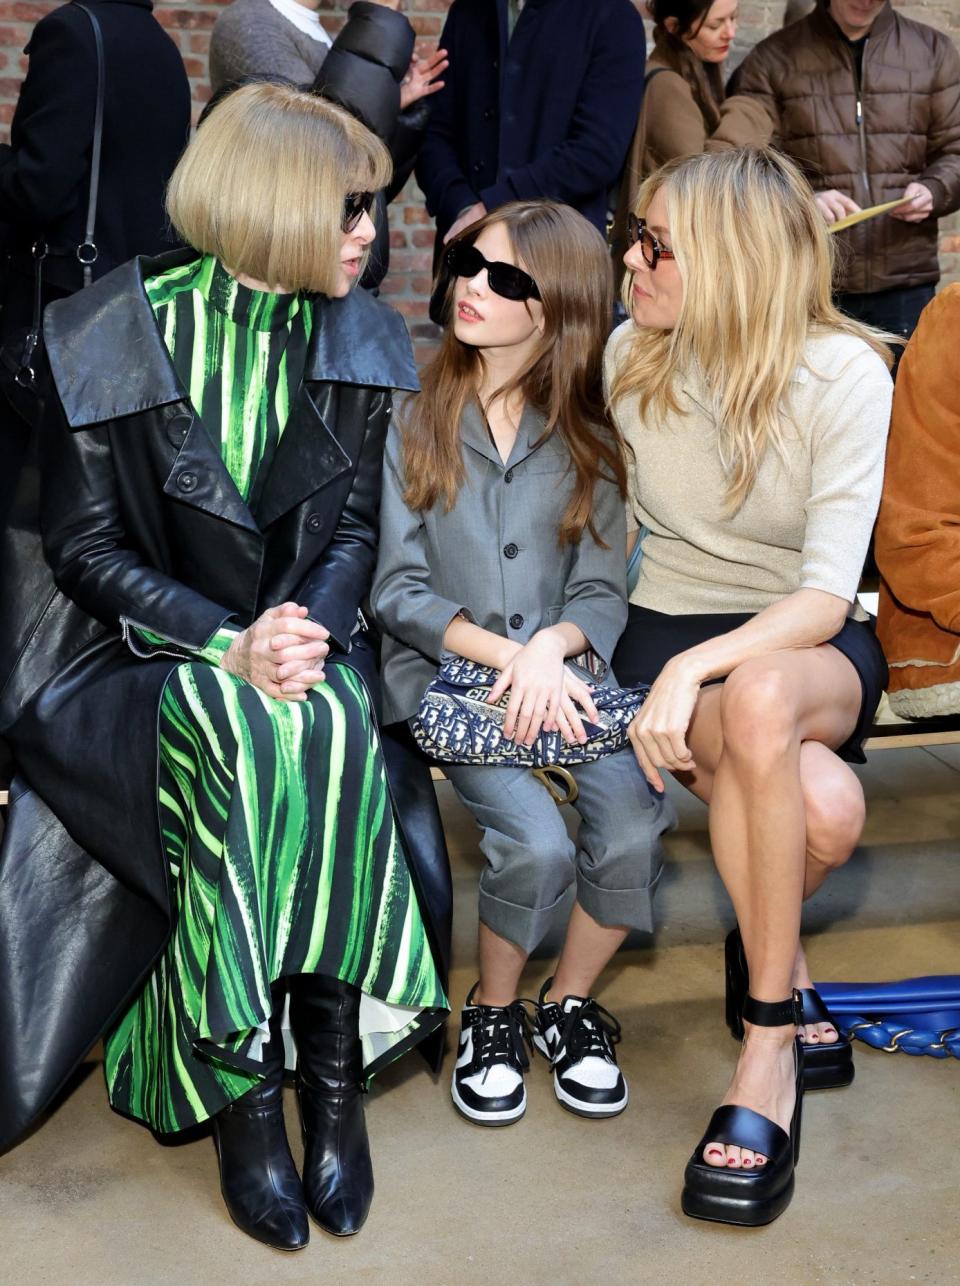 Anna Wintour, Marlowe Sturridge and Sienna Miller at the Proenza Schouler show during New York Fashion Week - Arturo Holmes /Getty Images North America